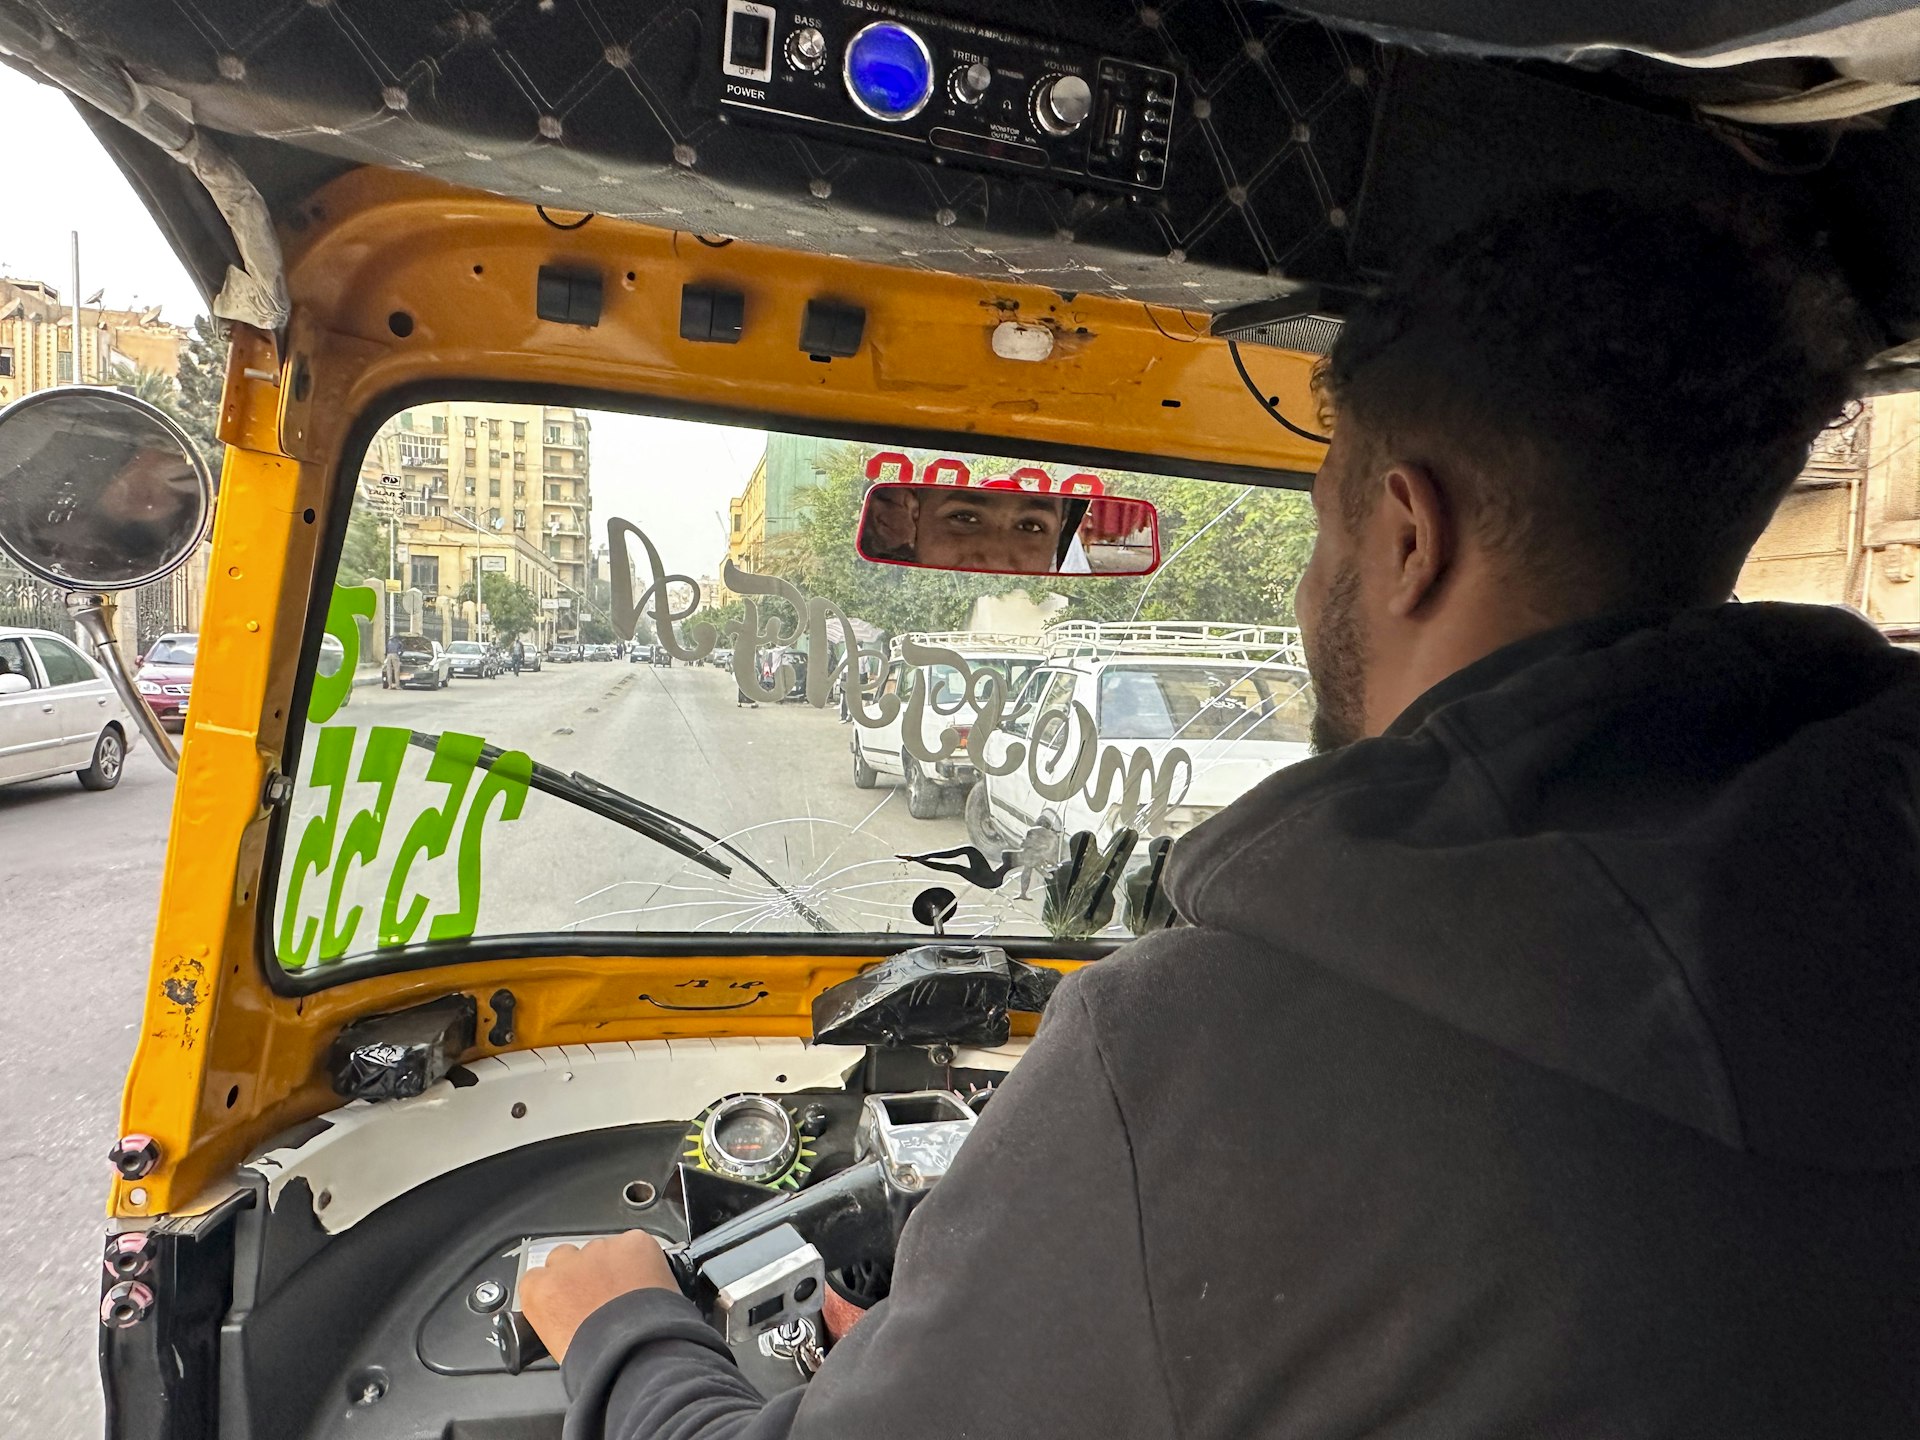 A tuk-tuk driver gives a small smile to his passenger in the rear-view mirror as he drives along